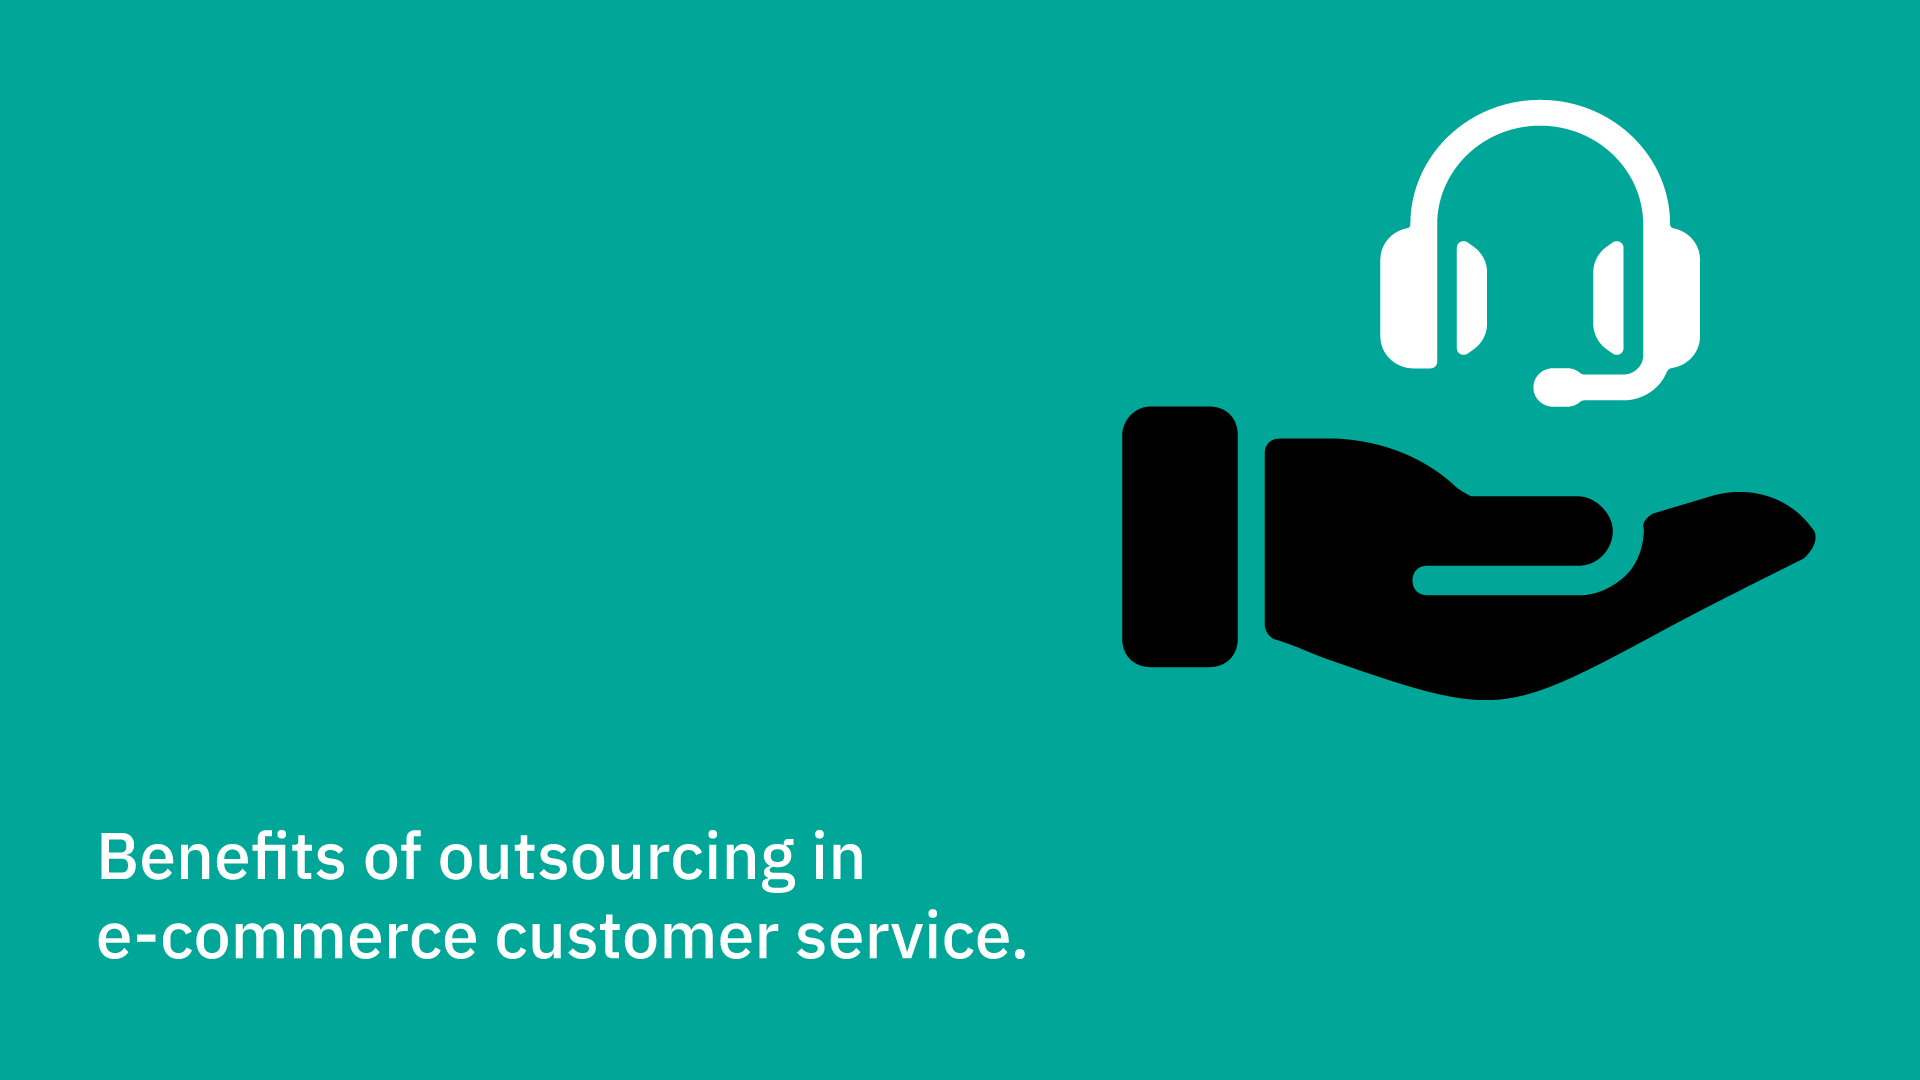 Benefits of outsourcing in e-commerce customer service.